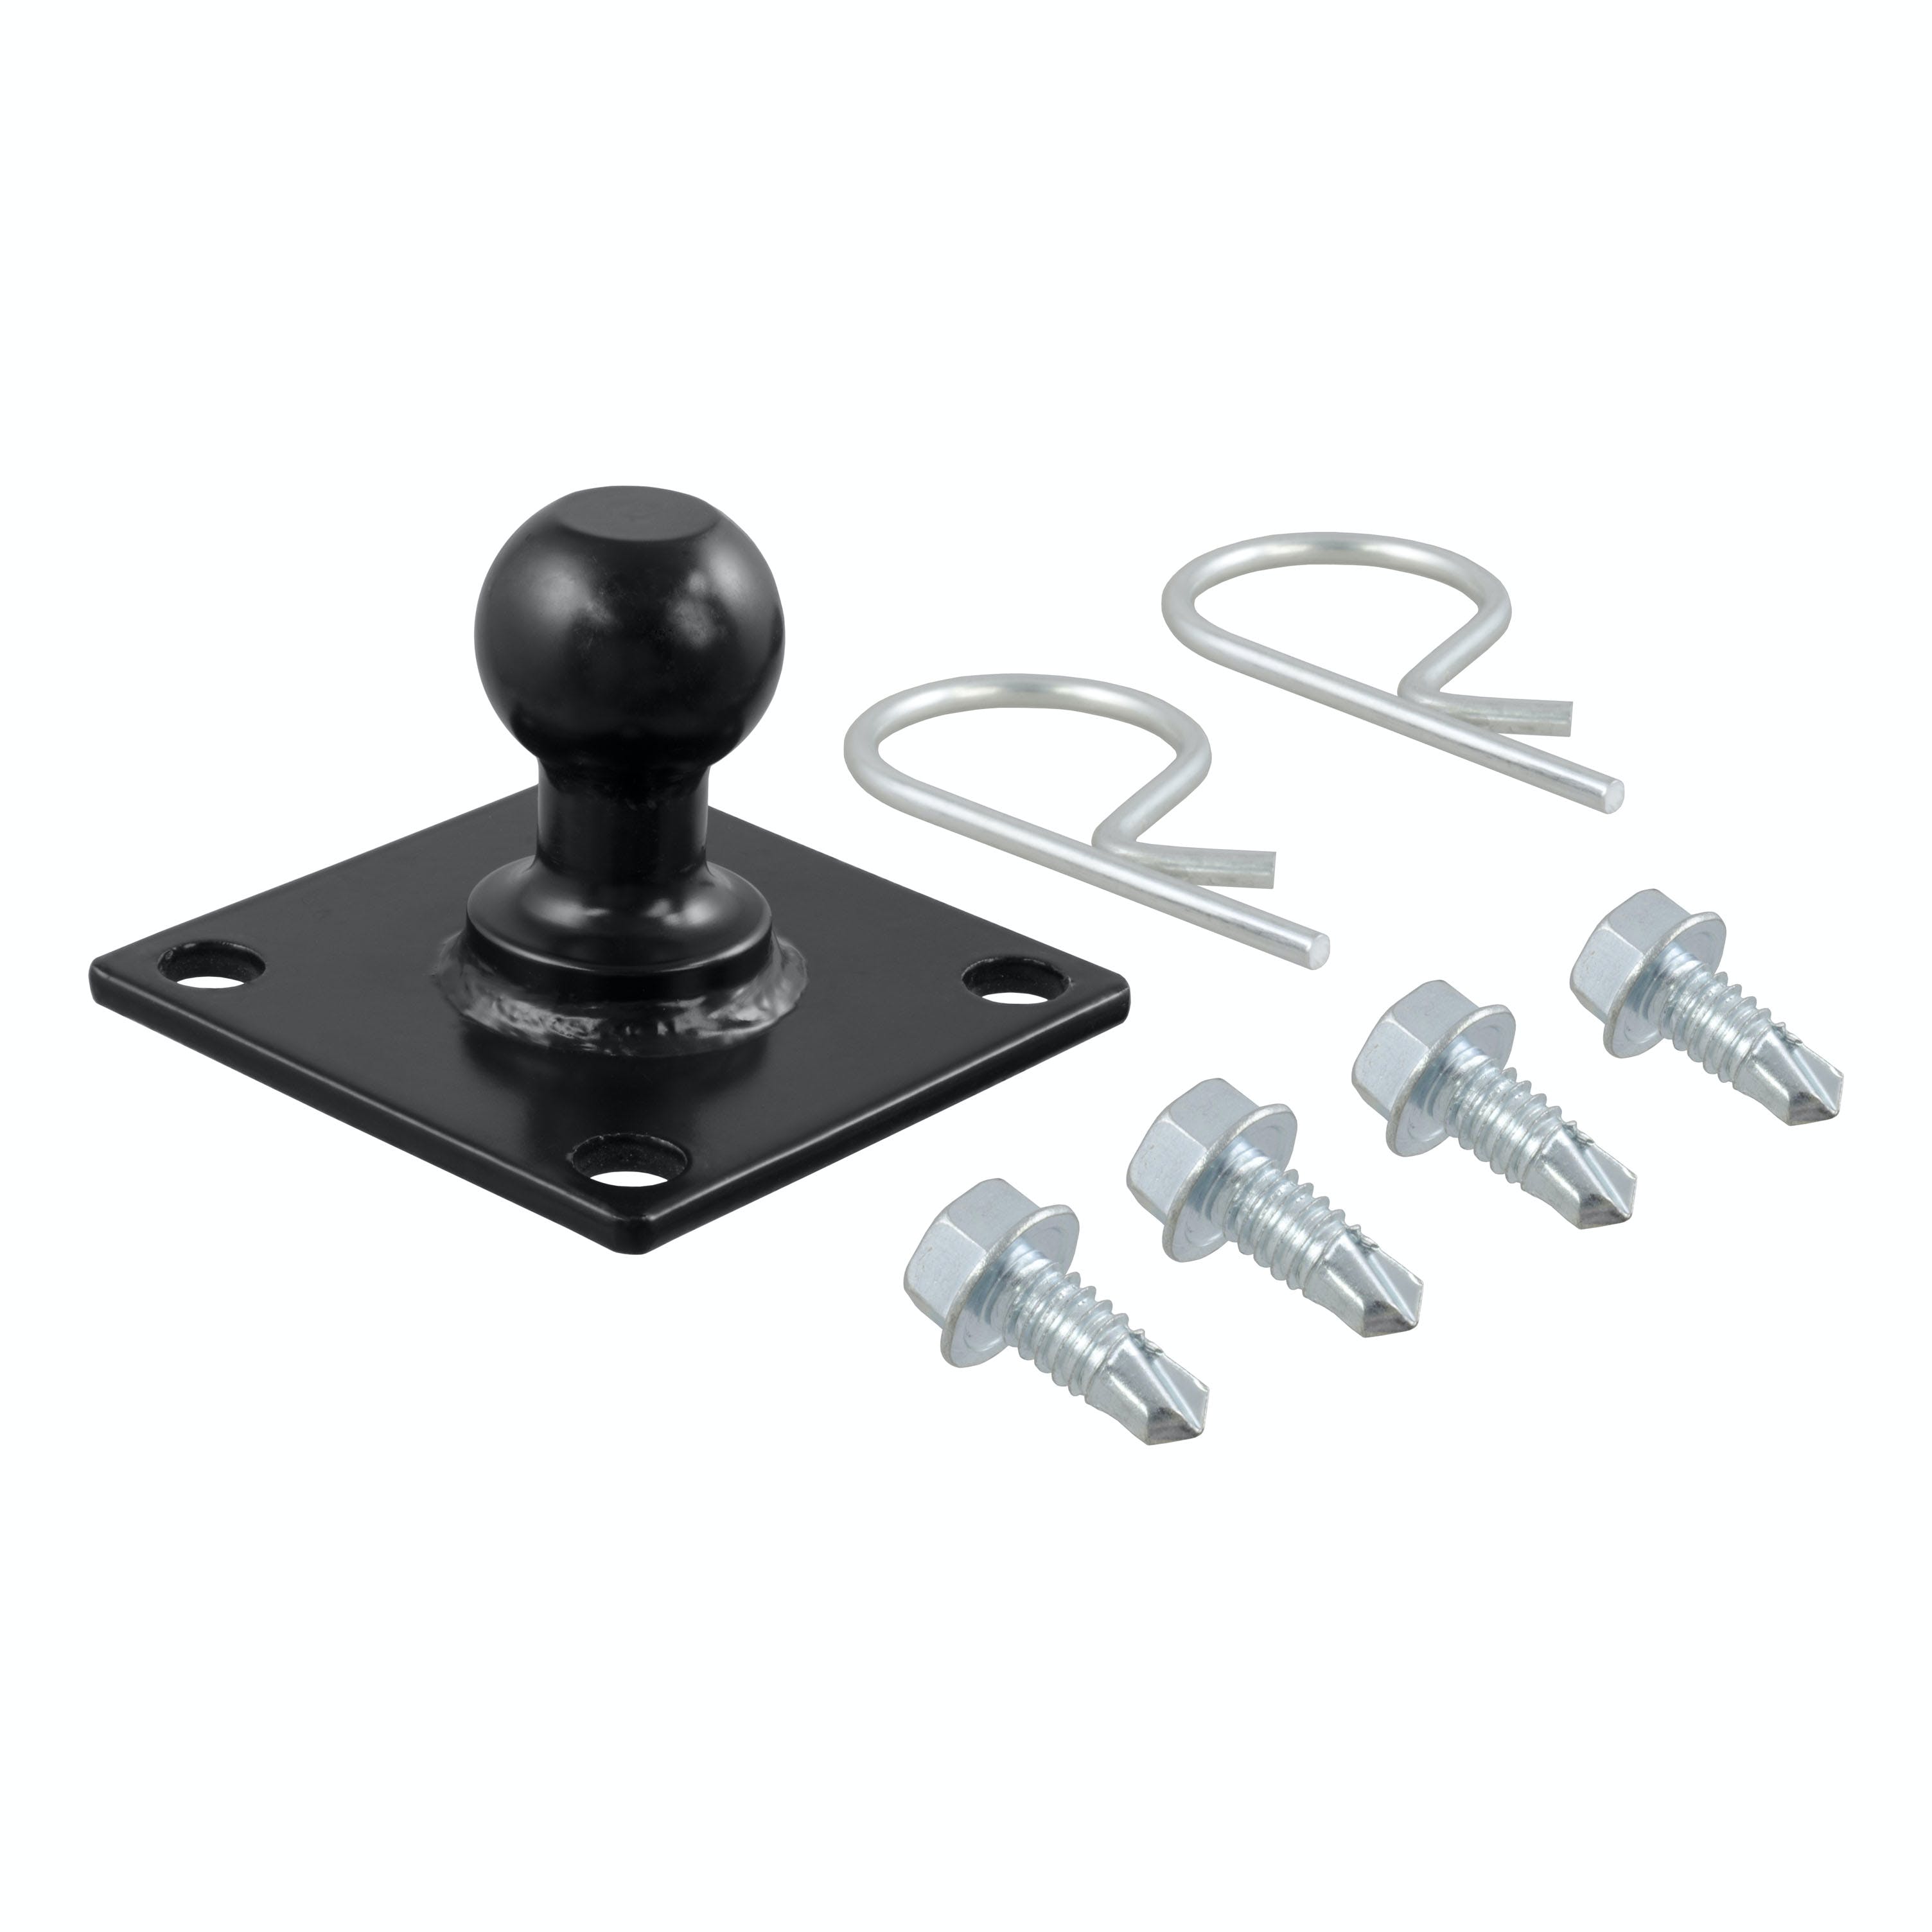 CURT 17201 Trailer-Mounted Sway Control Ball for #17200